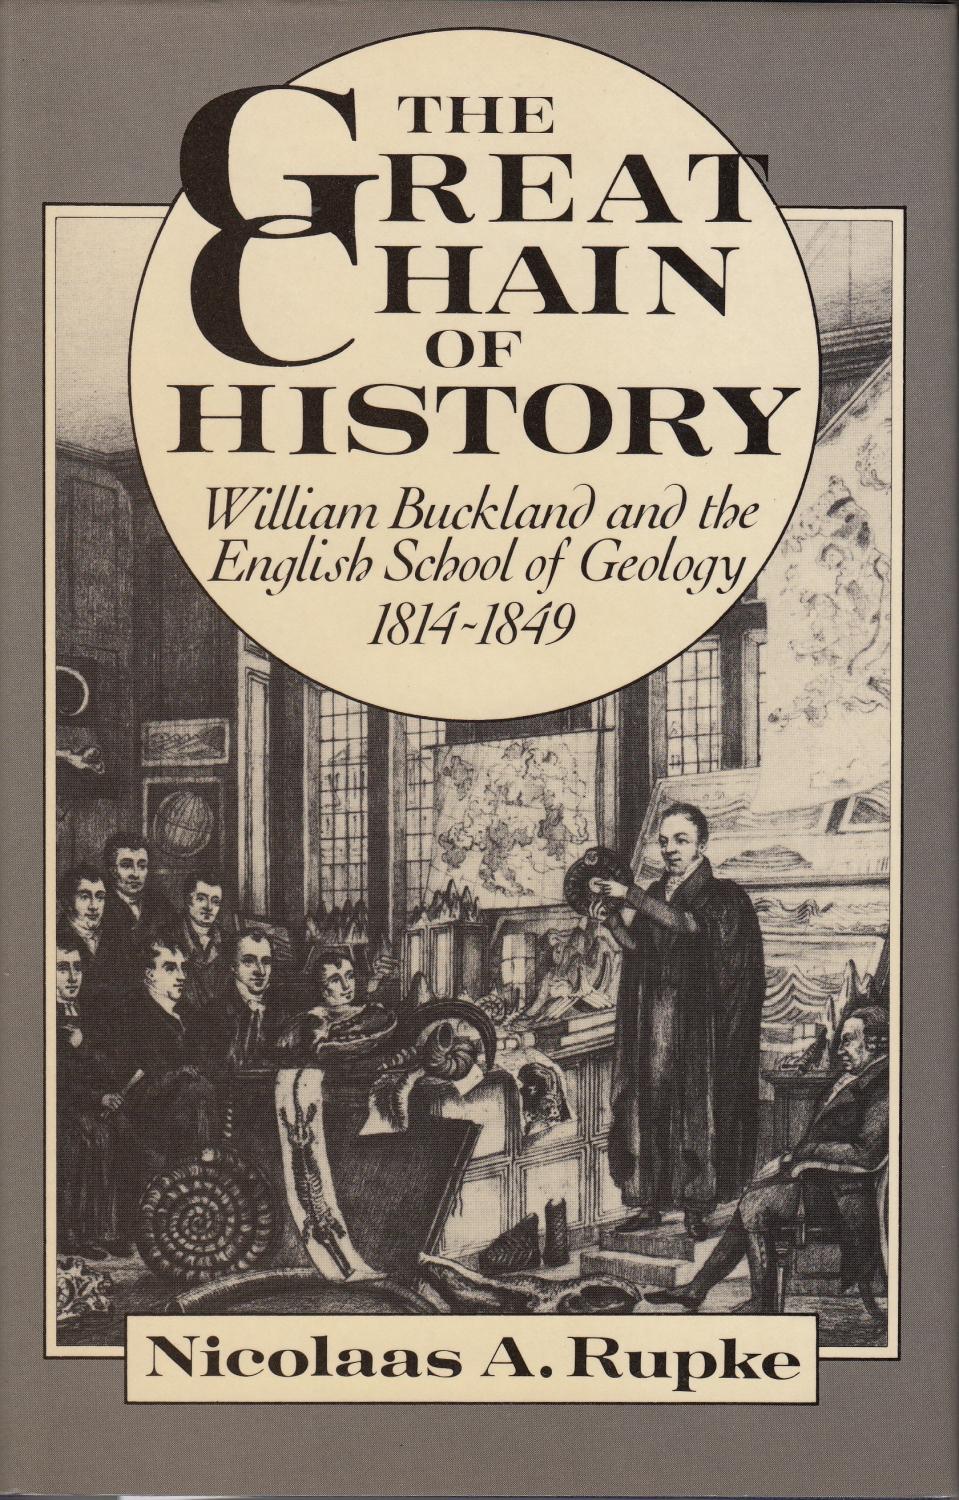 The Great Chain of History: William Buckland and the English School of Geology, 1814-1849 - Rupke, Nicolaas A.